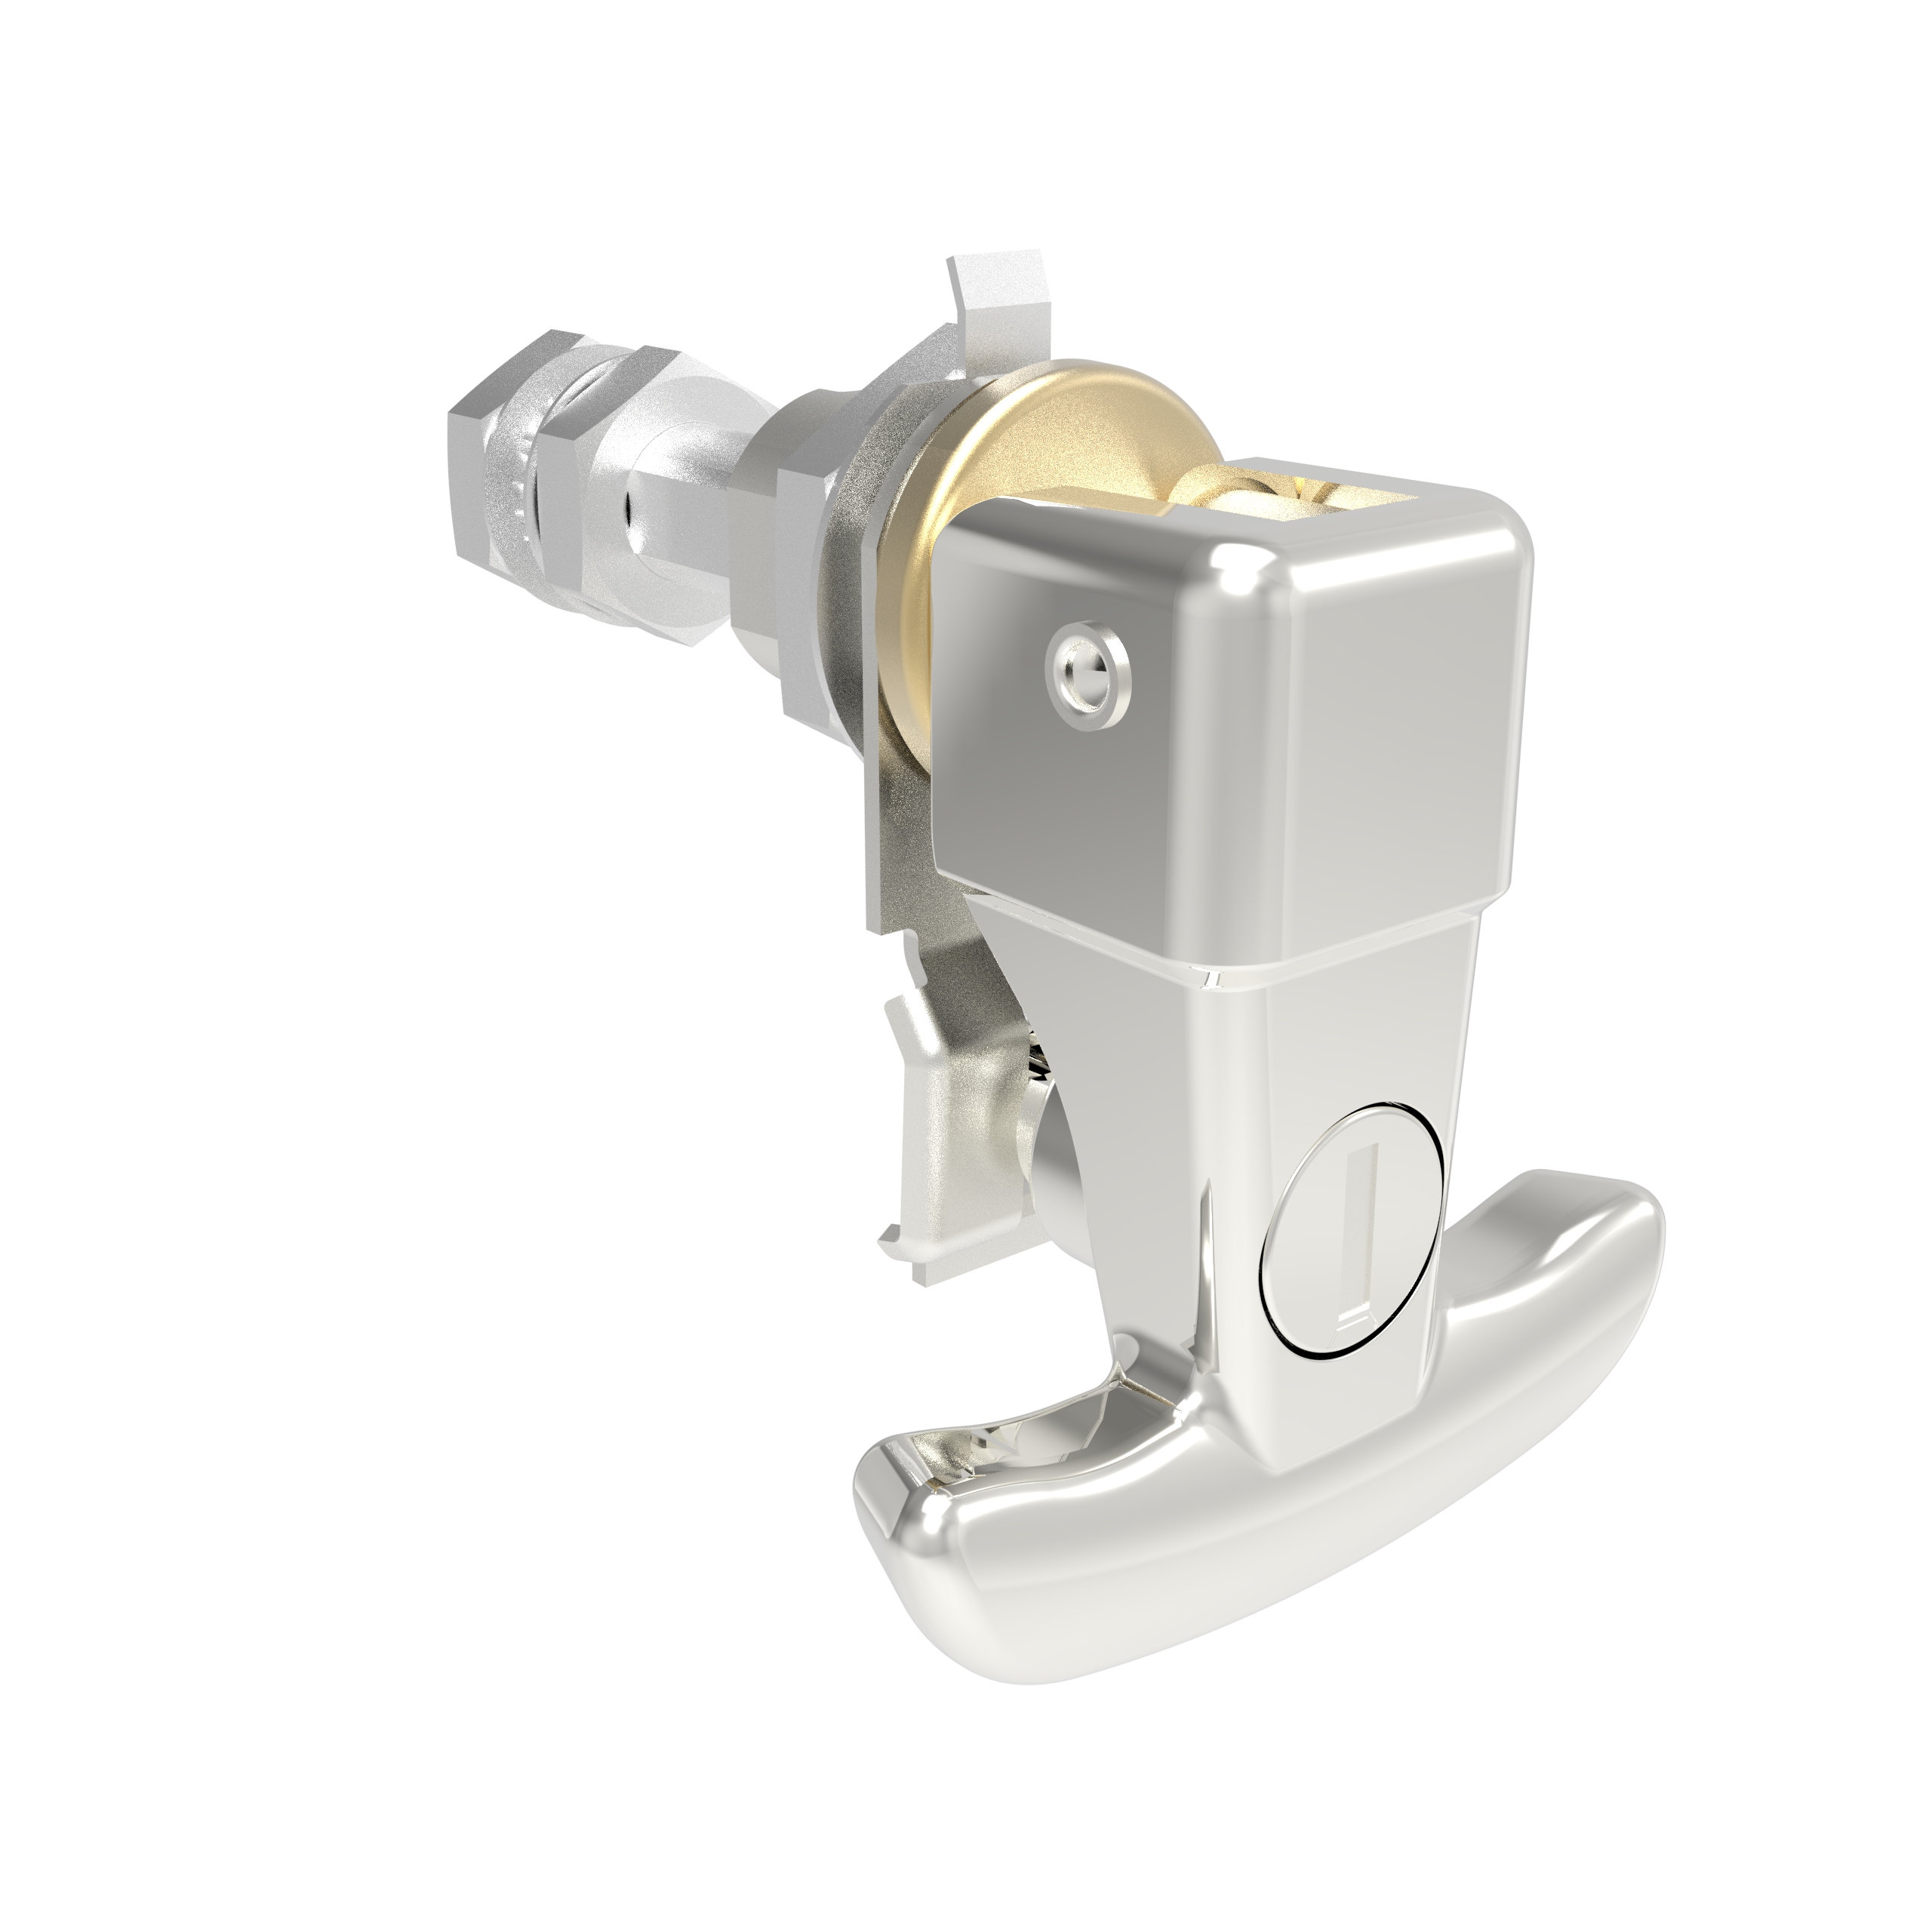 A-1548-1010-A1 | Compression type door lock, lift turn series, heavy duty size, key lock, stainless steel,polishing,bright